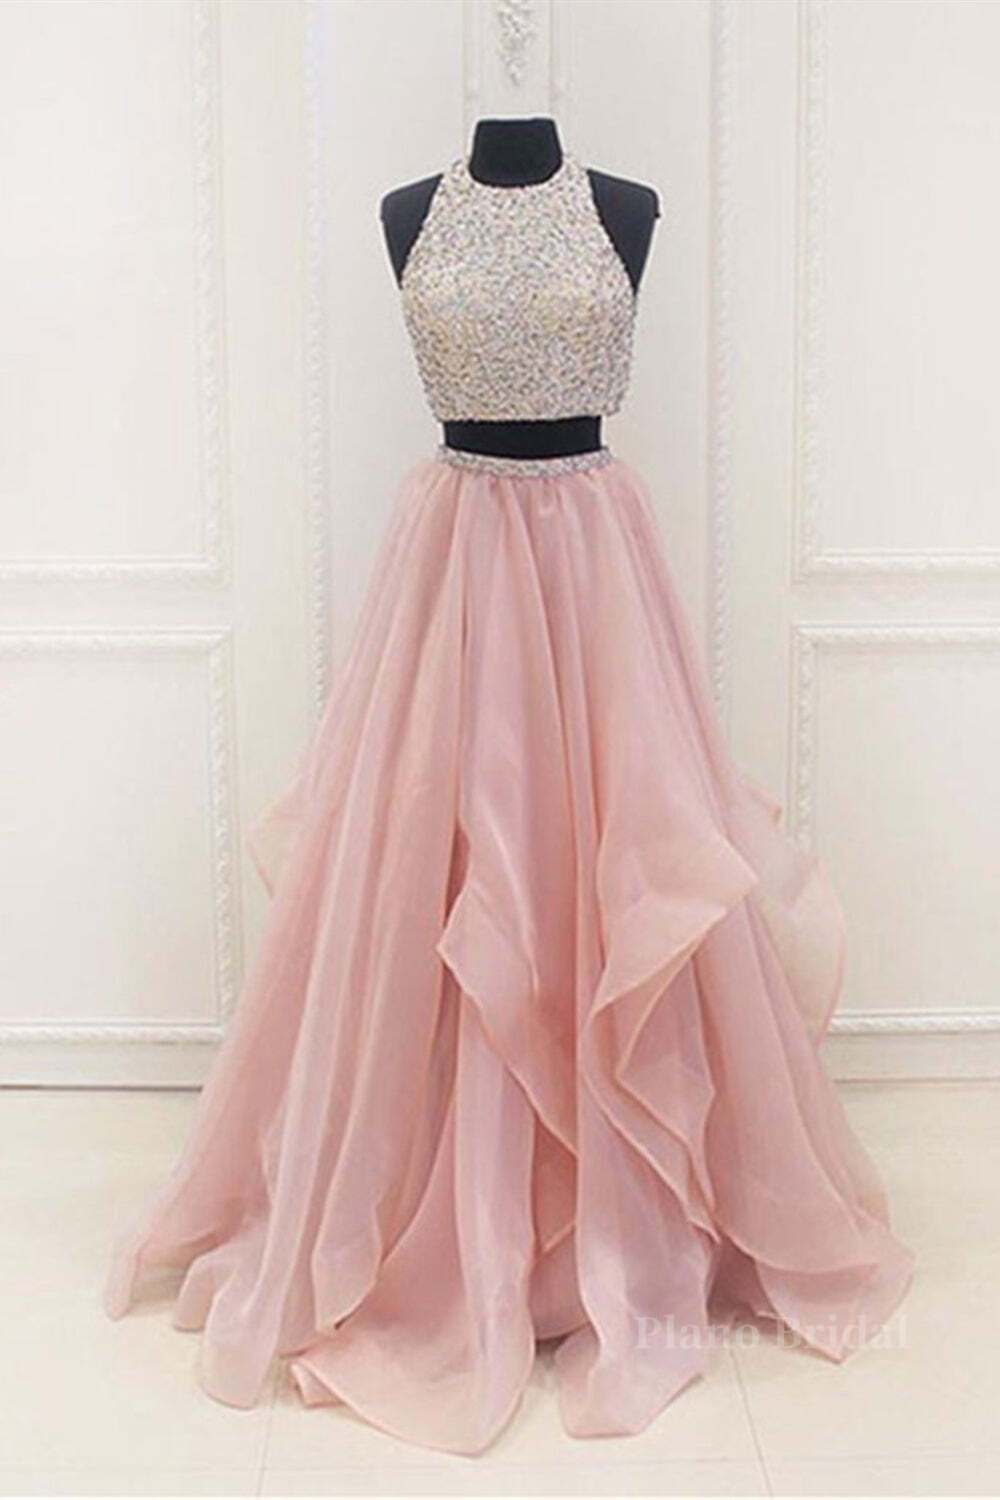 Gorgeous Round Neck Two Pieces Long Prom Dresses, 2 Pieces Formal Evening Dresses